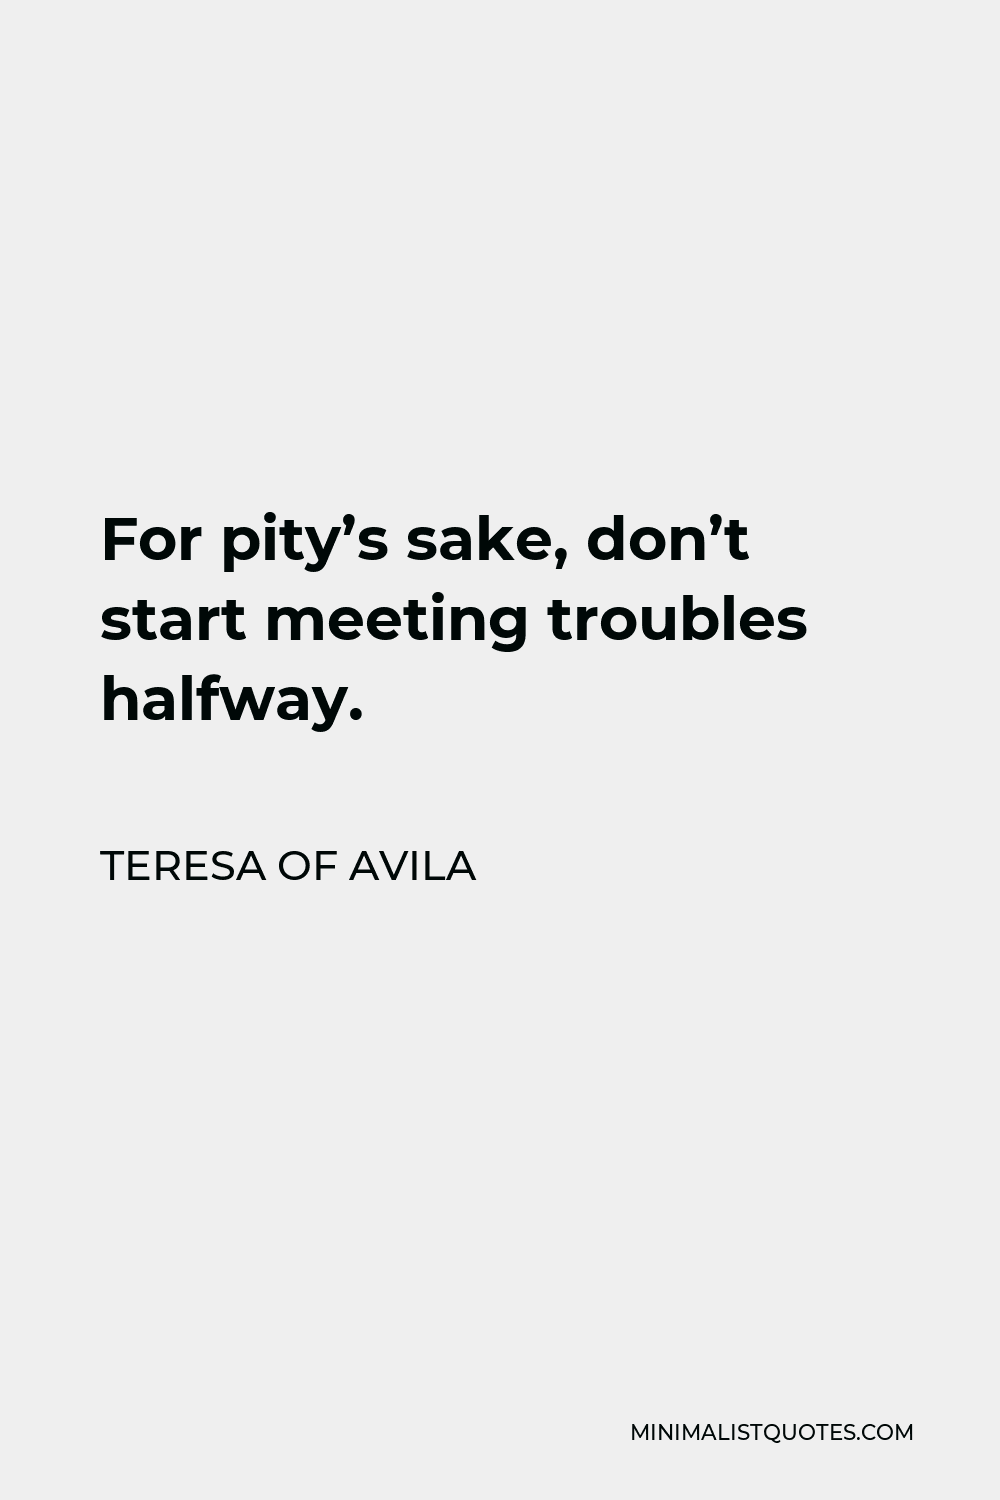 Teresa of Avila Quote - For pity’s sake, don’t start meeting troubles halfway.